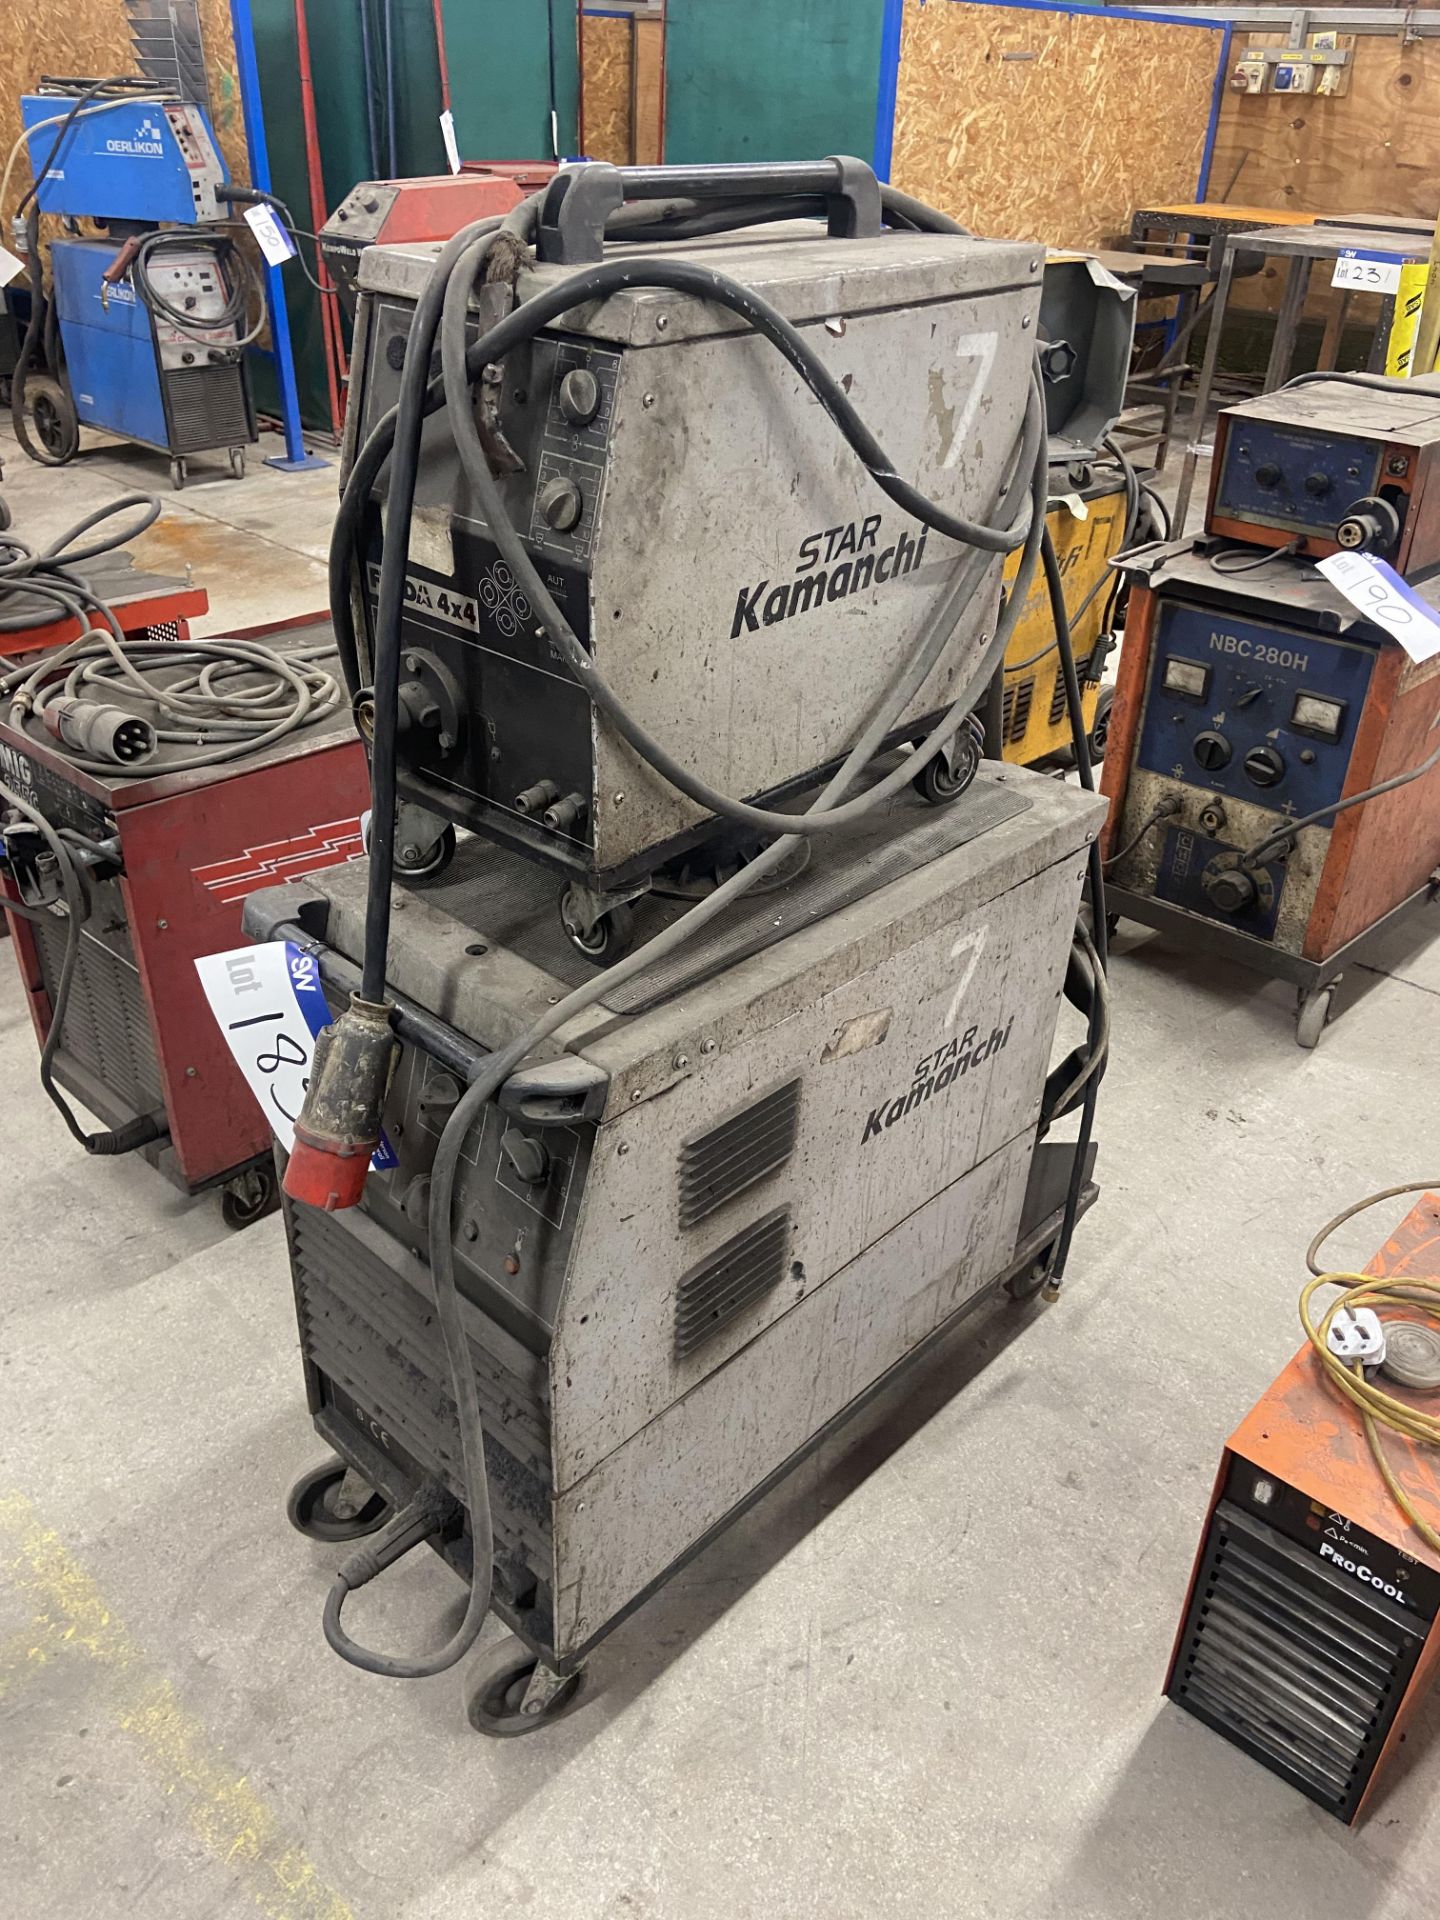 Star Kamanchi Welda 450S Welding Equipment (may require attention) Please read the following